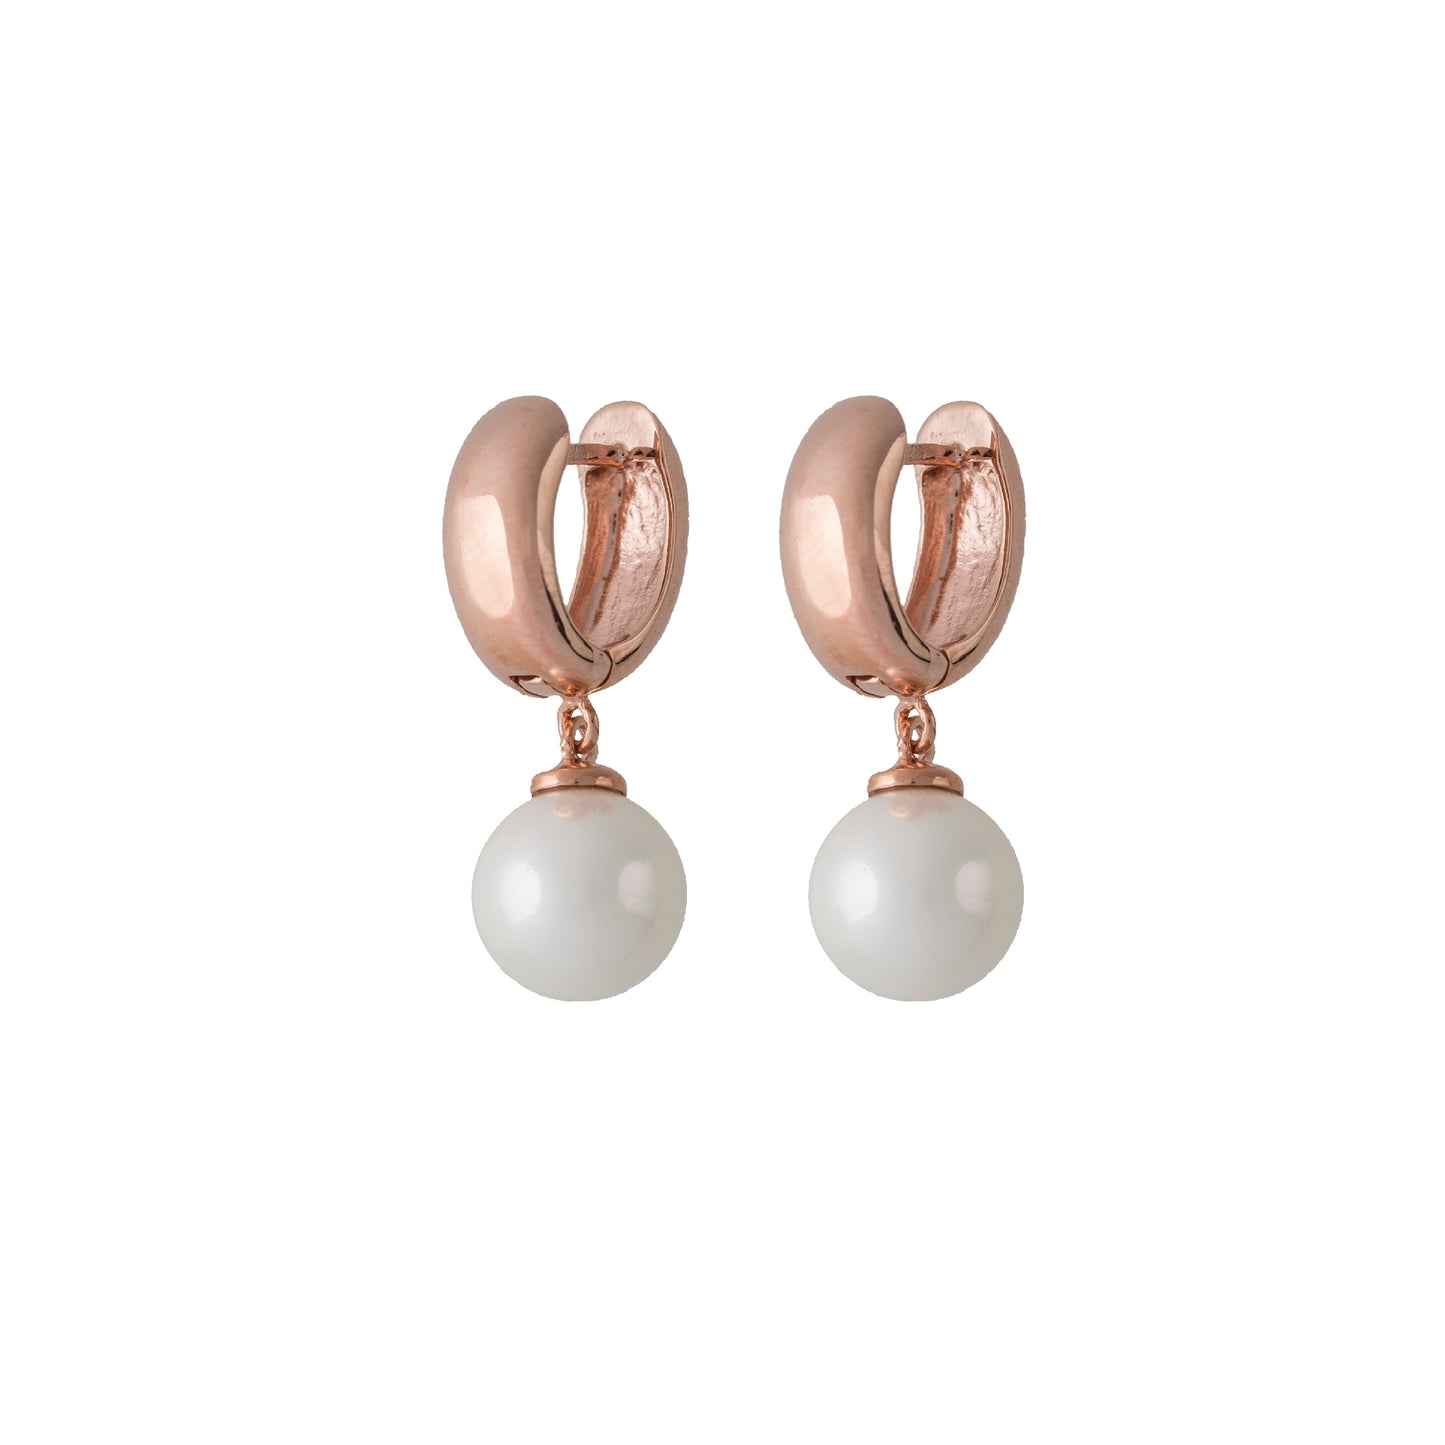 Mallorca Style Pearl Earrings Creolen by Nelissima